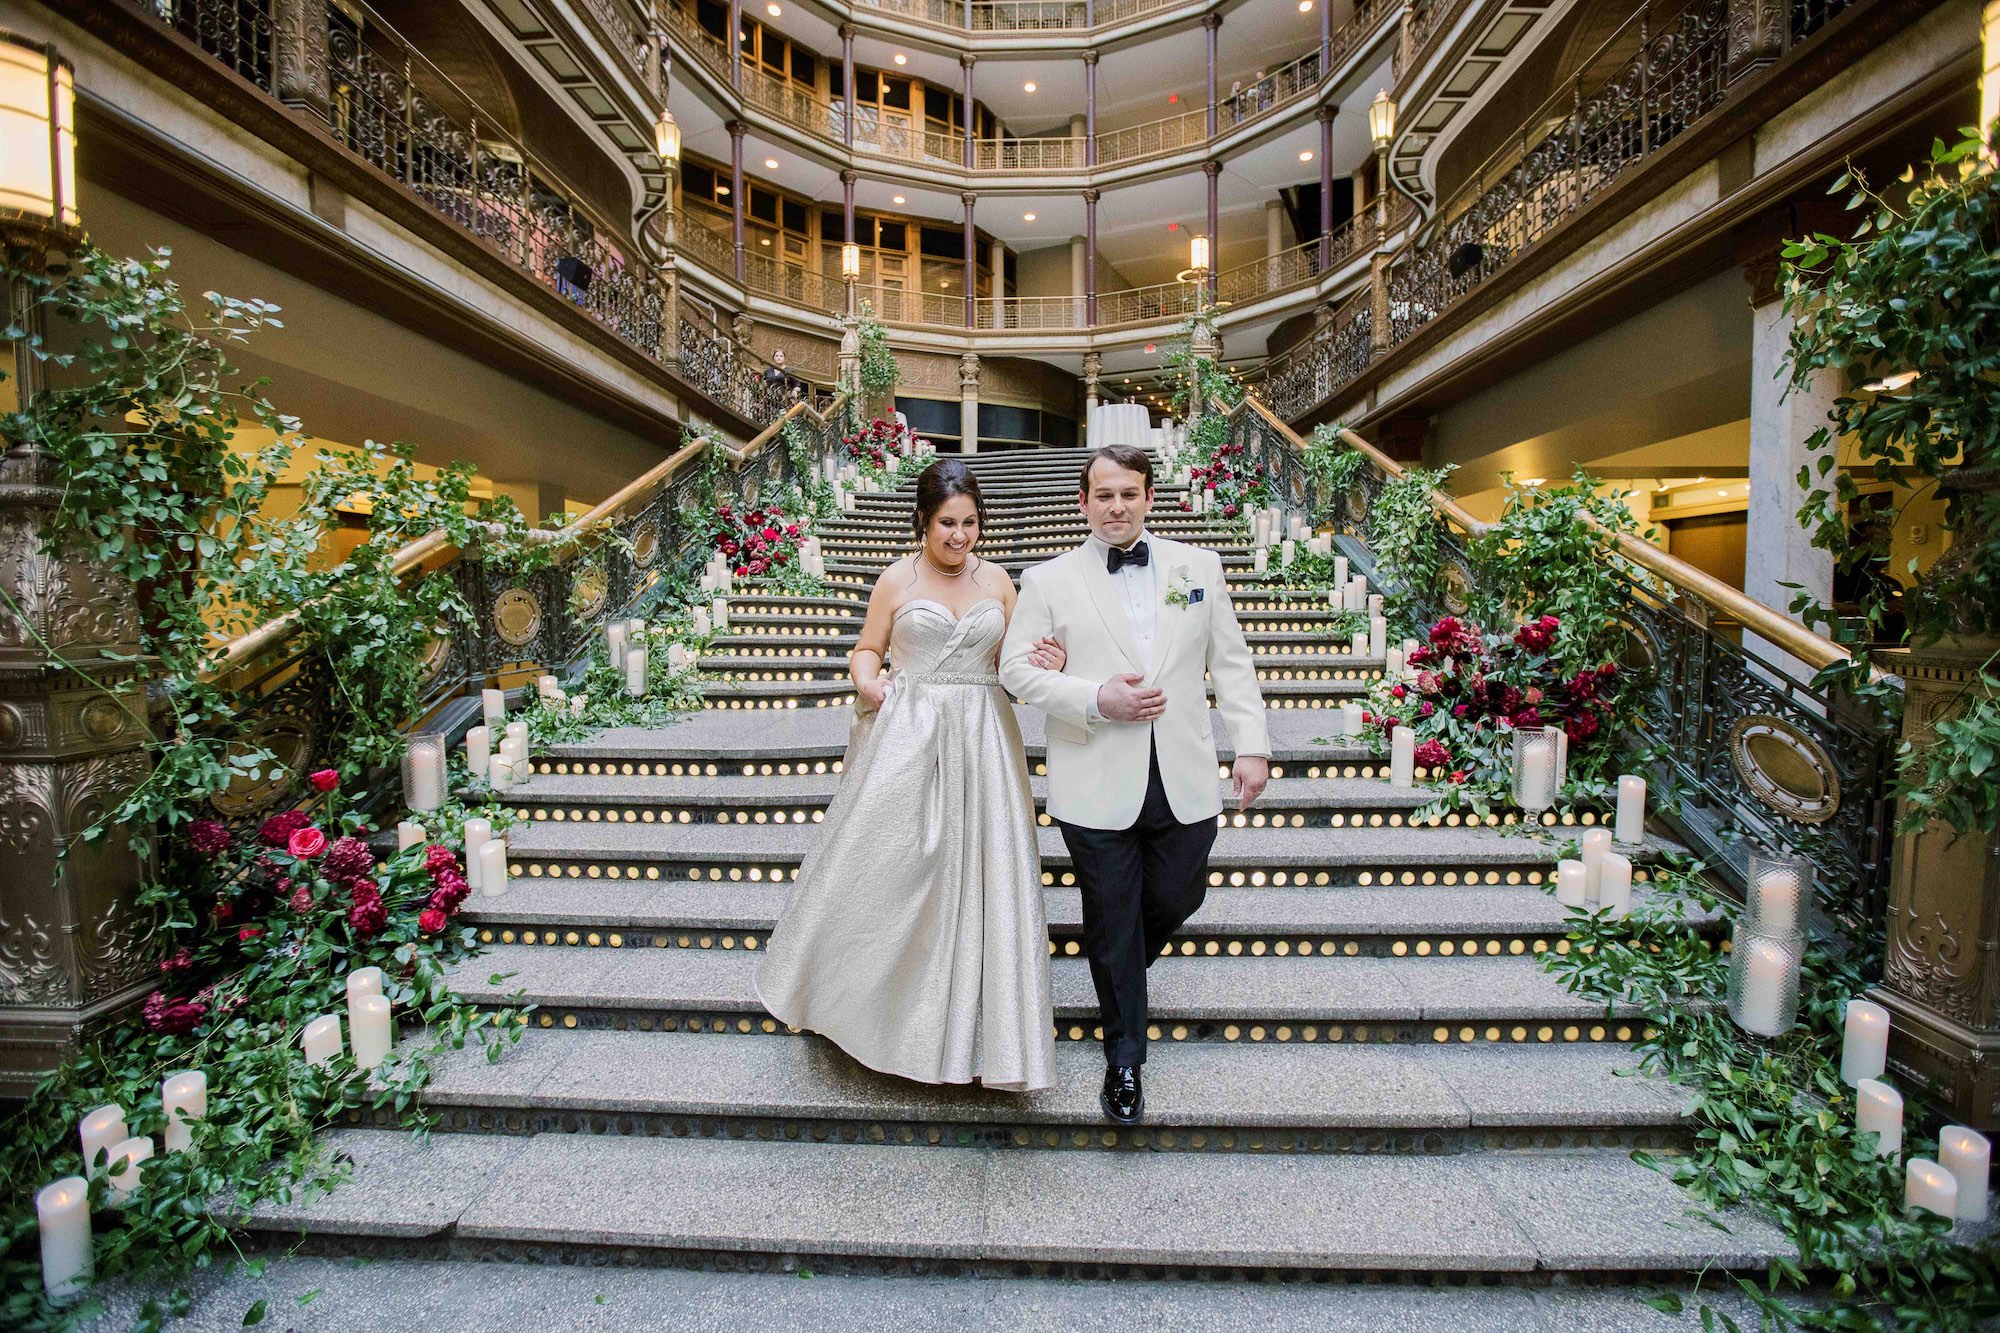 Bride and Groom walk down main staircase at Hyatt Cleveland in winter for their wedding entrance, flowers by HeatherLily